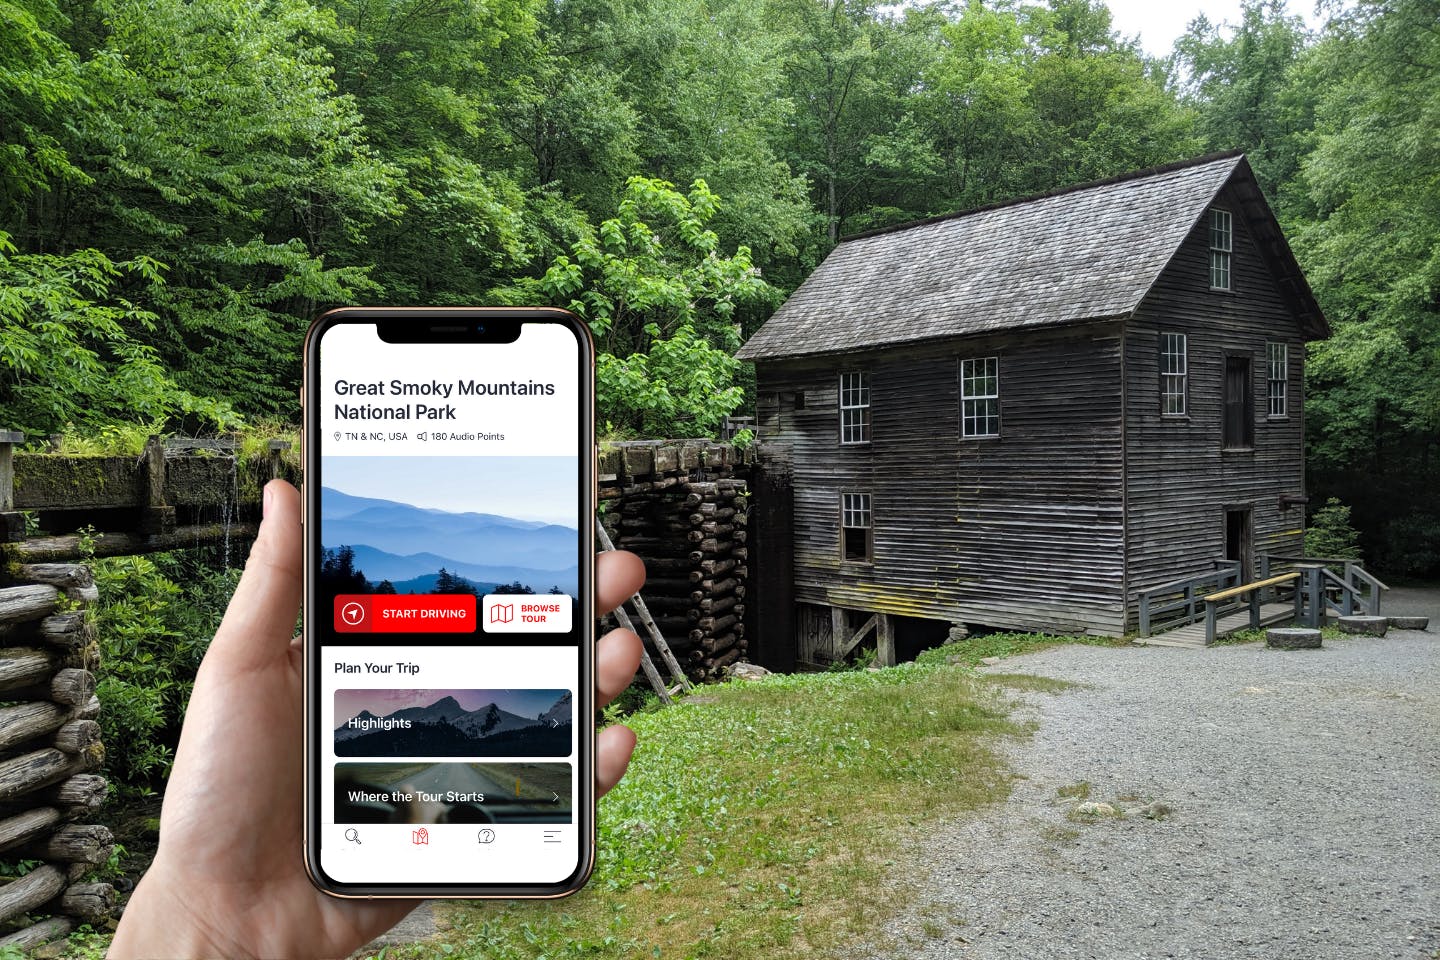 Audio-guided driving tour of the Smoky Mountain National Park